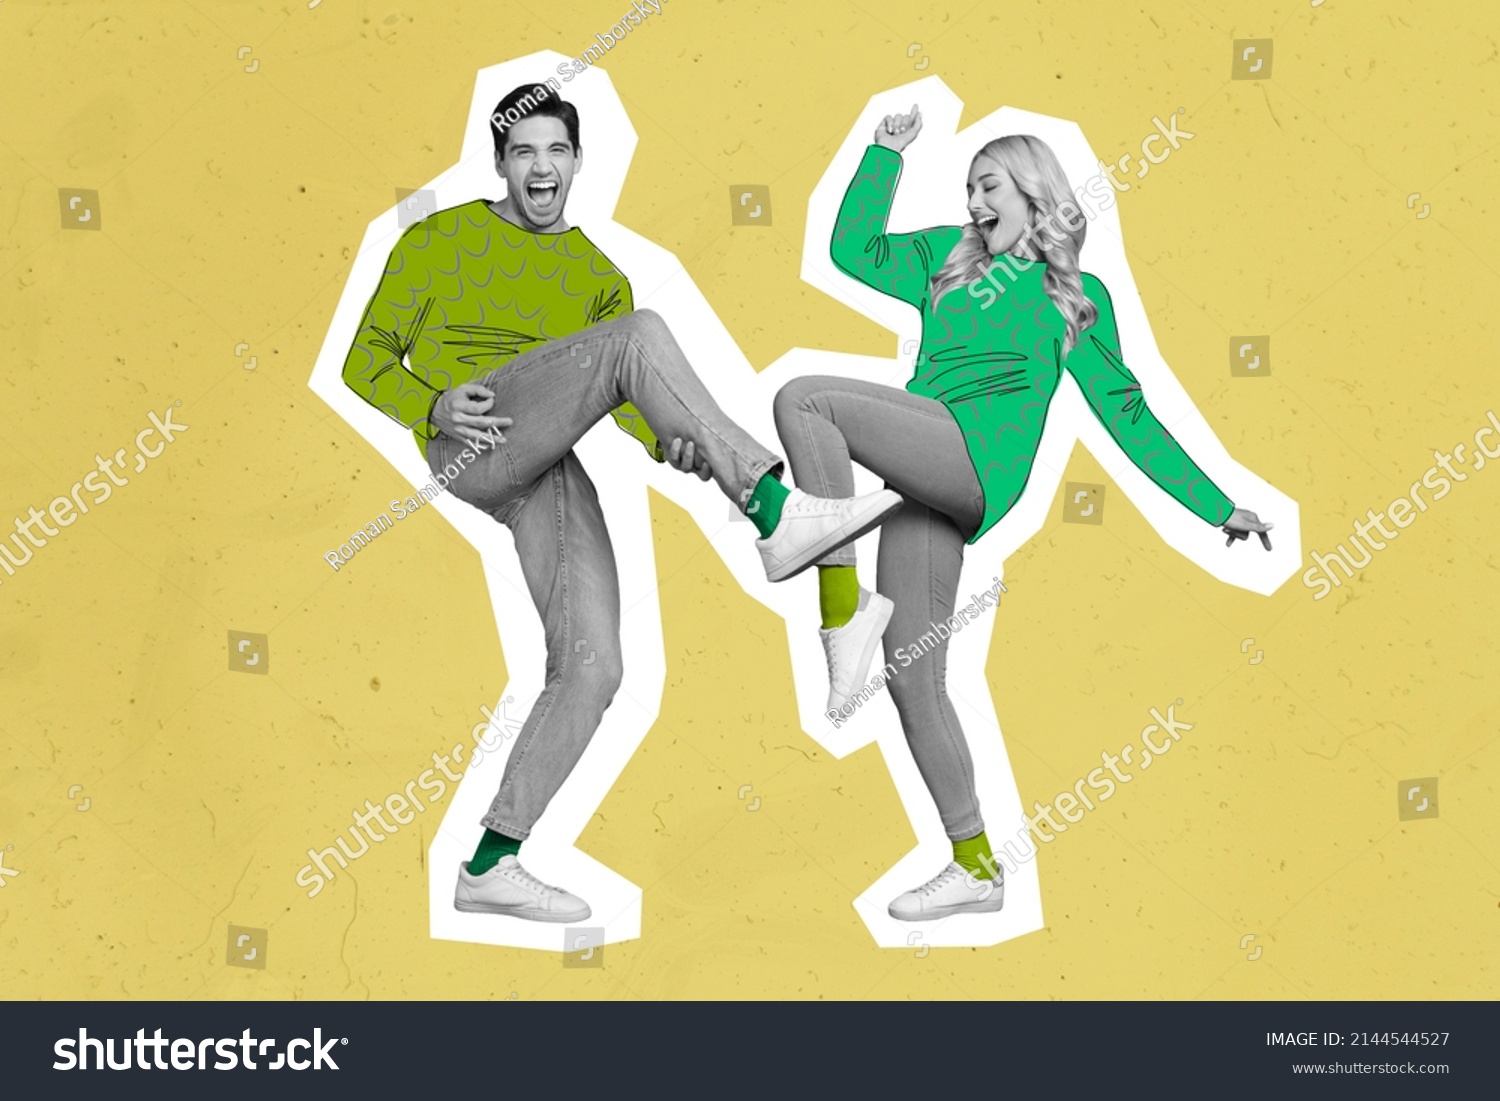 Full length photo collage in old fashion pin up pop art style two funny people man girl dancing crazy excitement nice painted neon sketch pullovers #2144544527